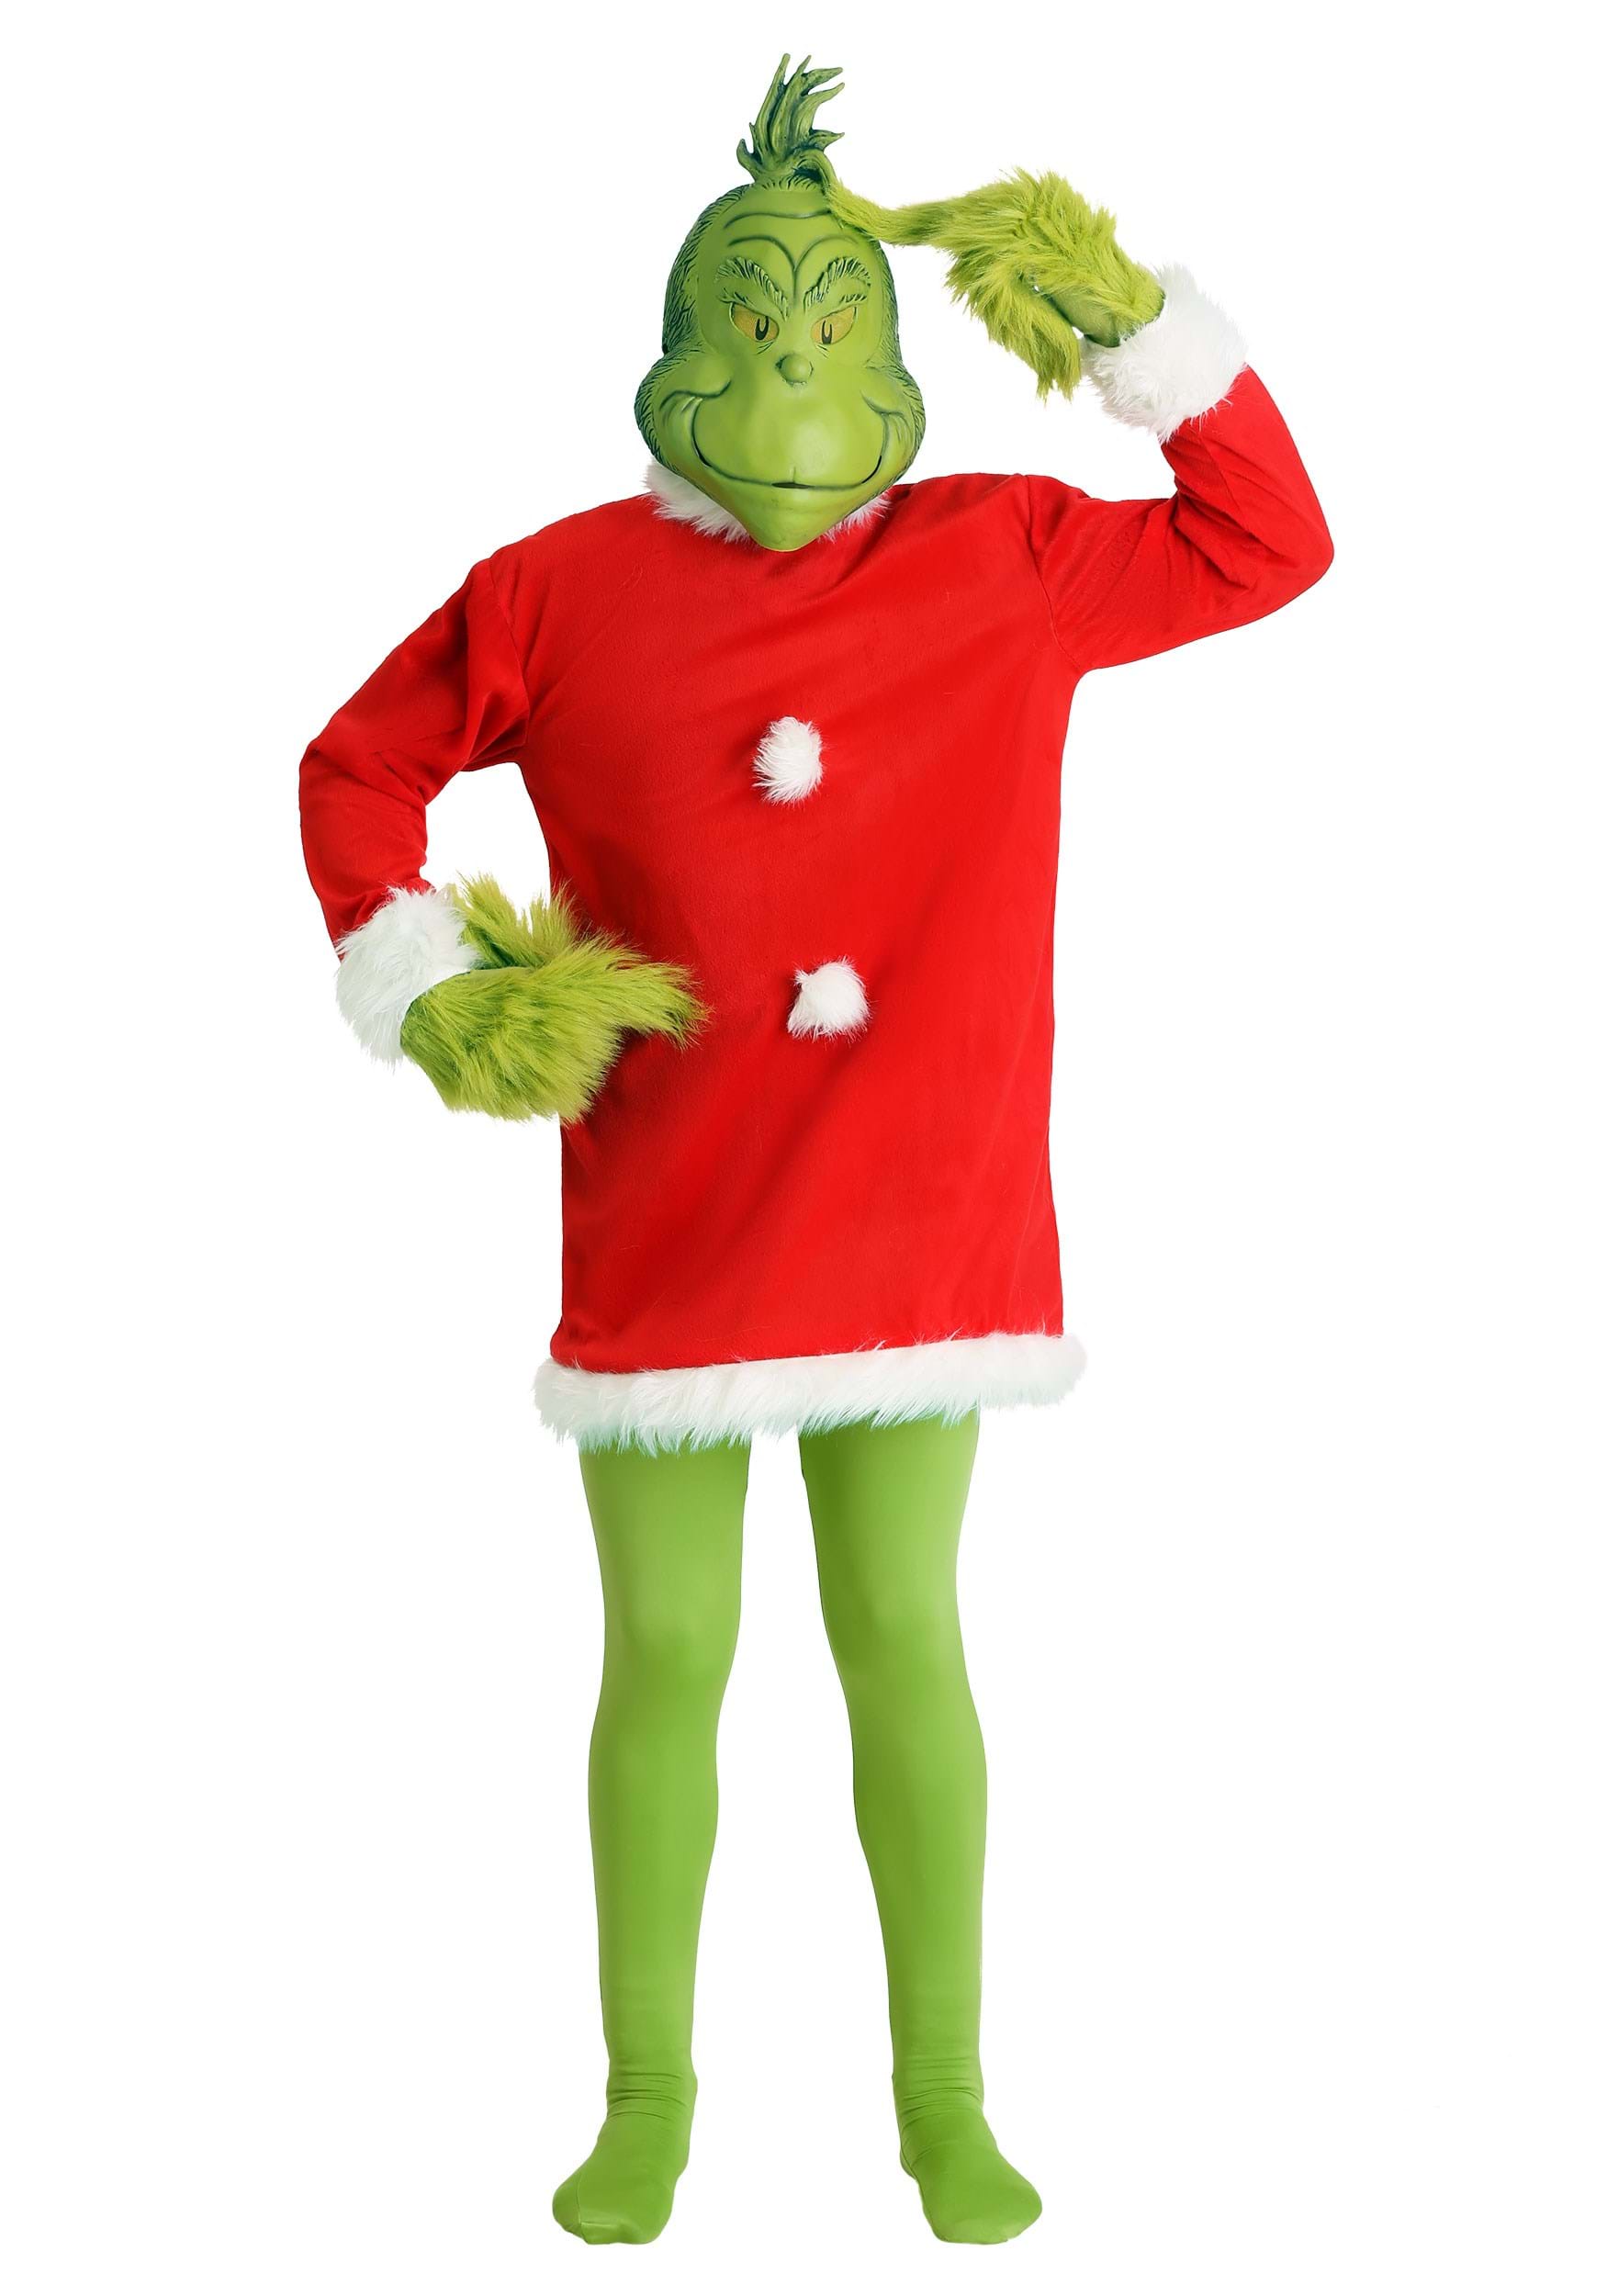 Grinch Plush Glove Christmas Halloween Deluxe Party Cosplay Props XMAS Supplies 